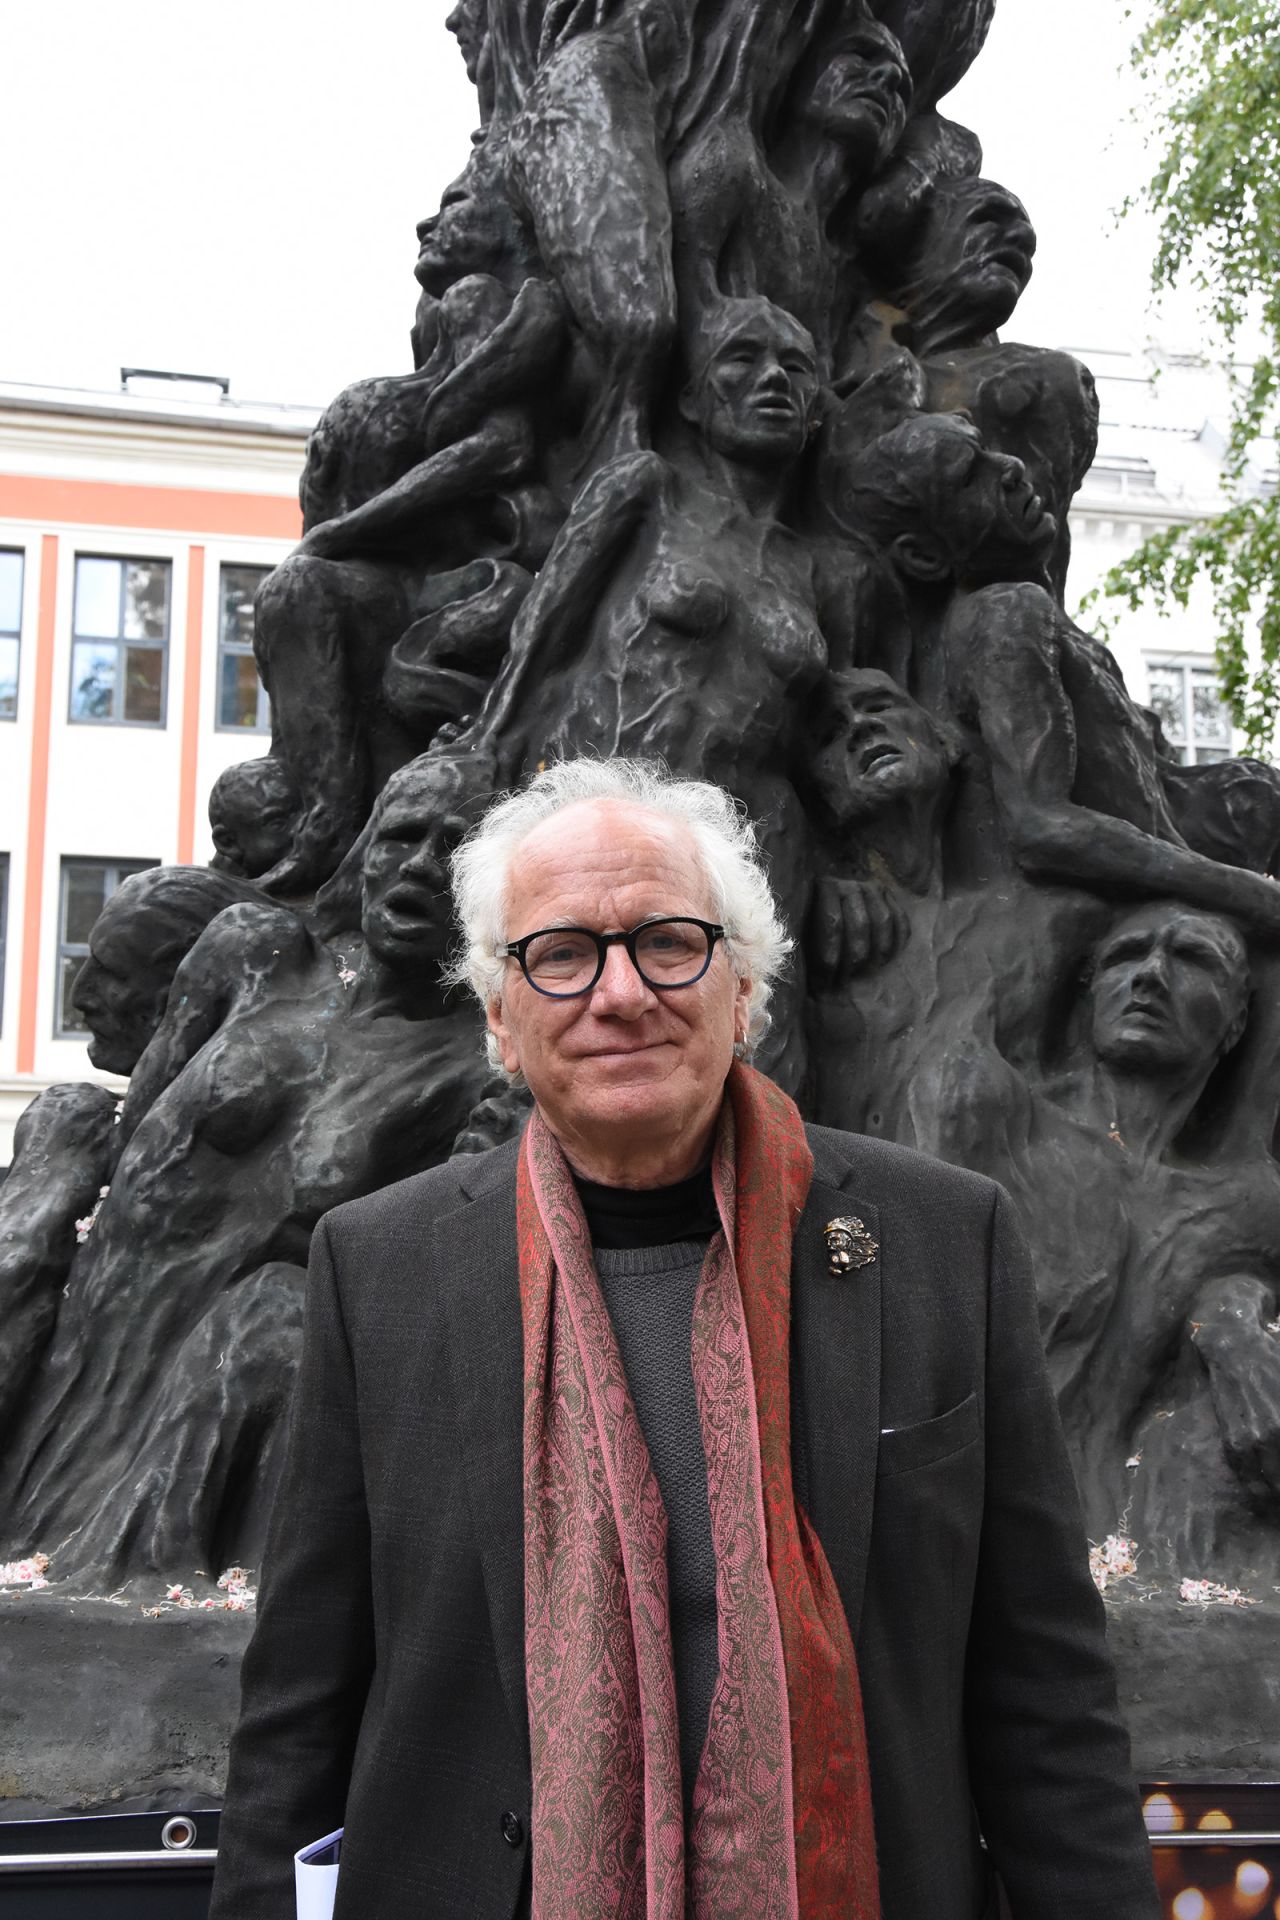 Artist Jens Galschiøt at Wednesday's unveiling in Oslo.